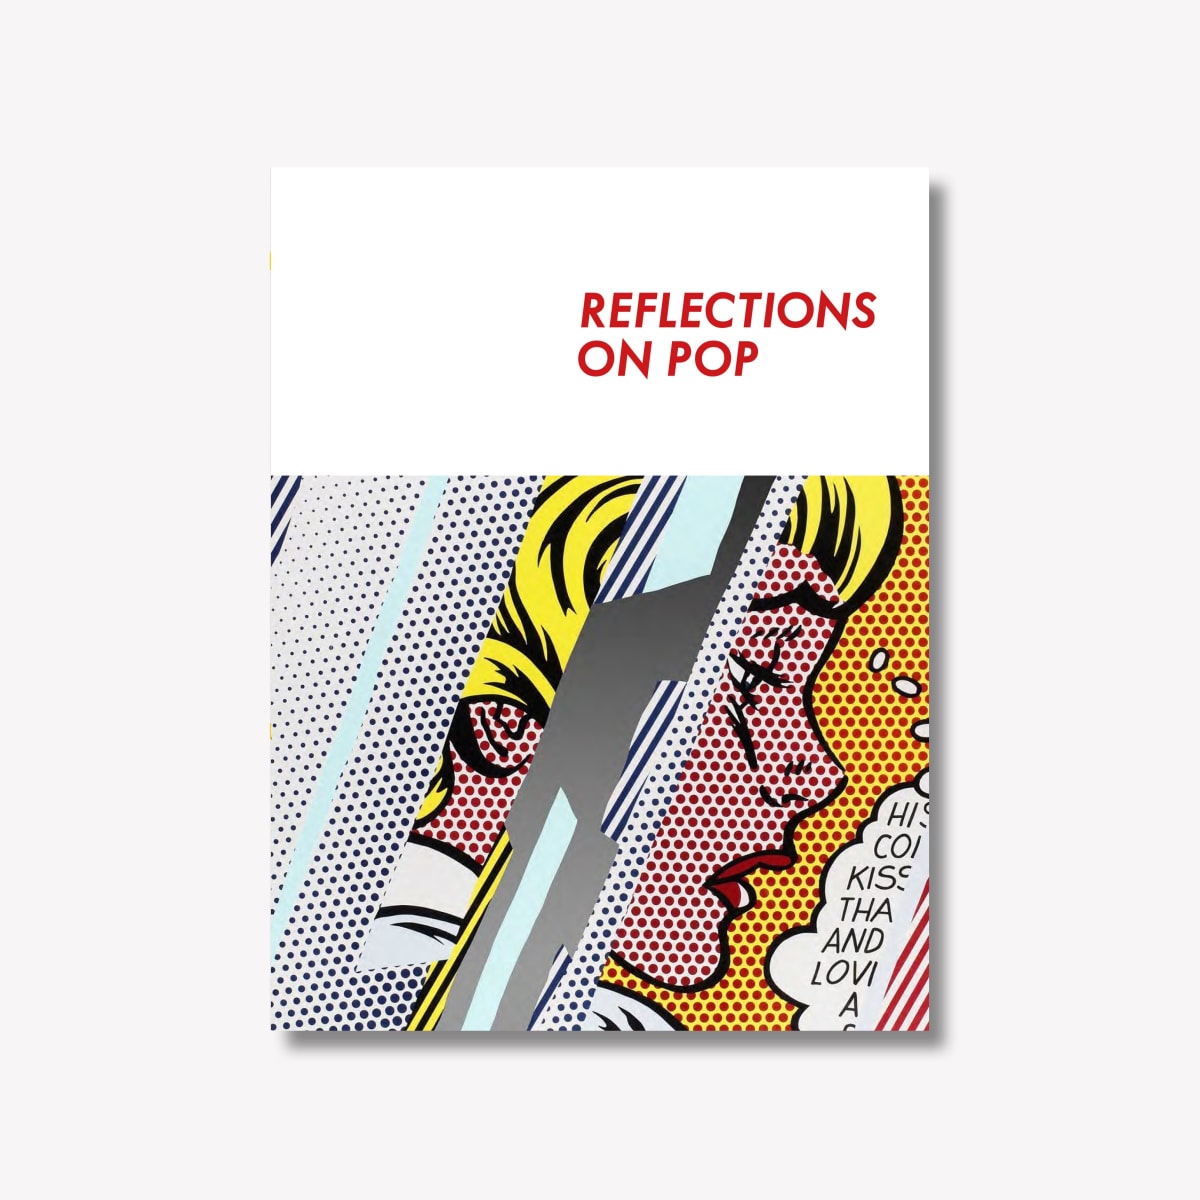 Reflections on Pop exhibition catalogue